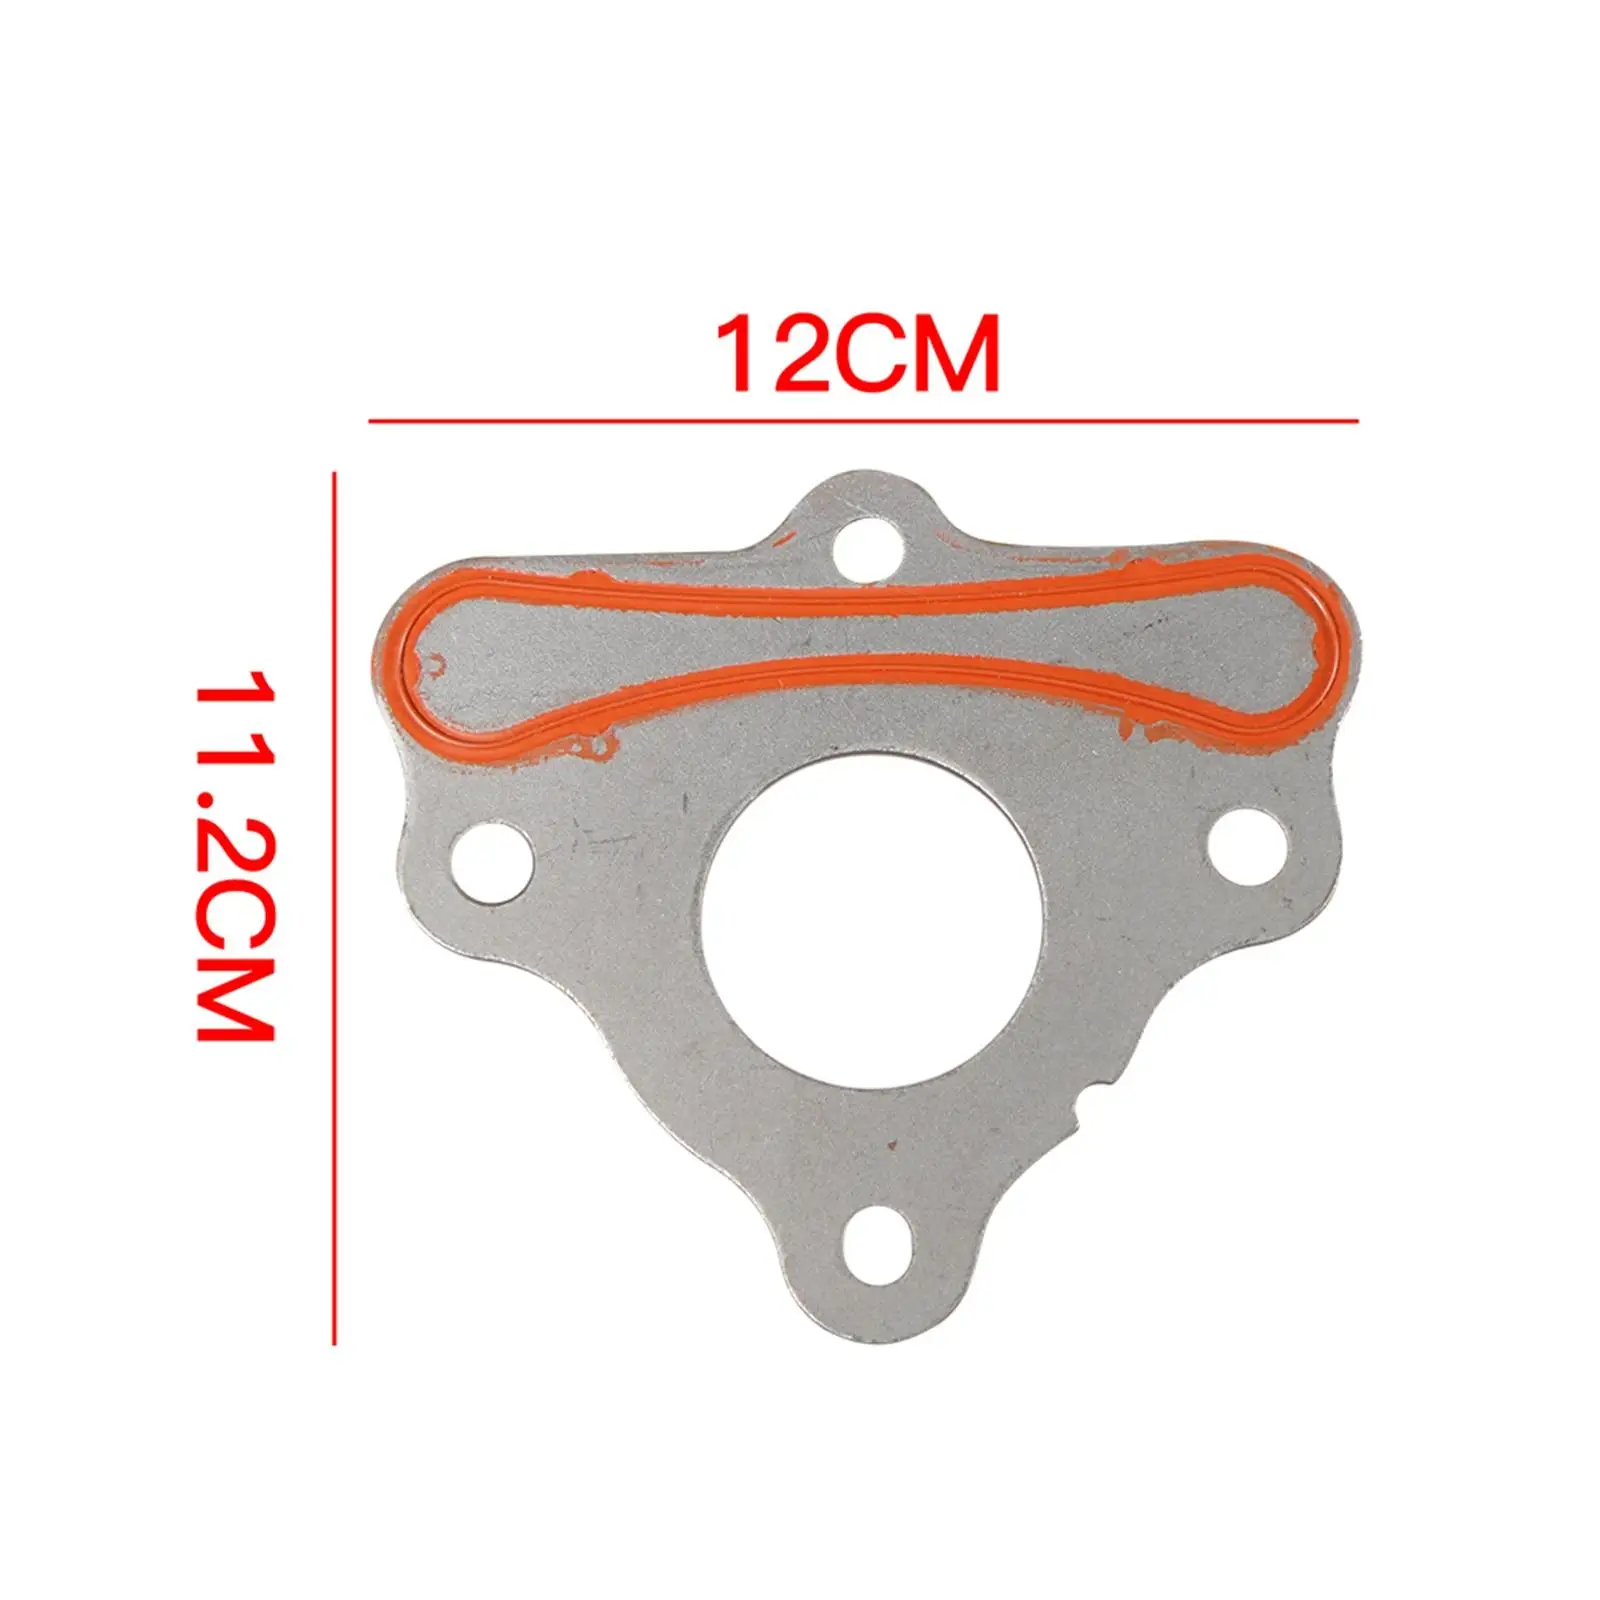 Camshaft Thrust Retainer Plate Fit for LS2 Acceories Premium Direct Replaces